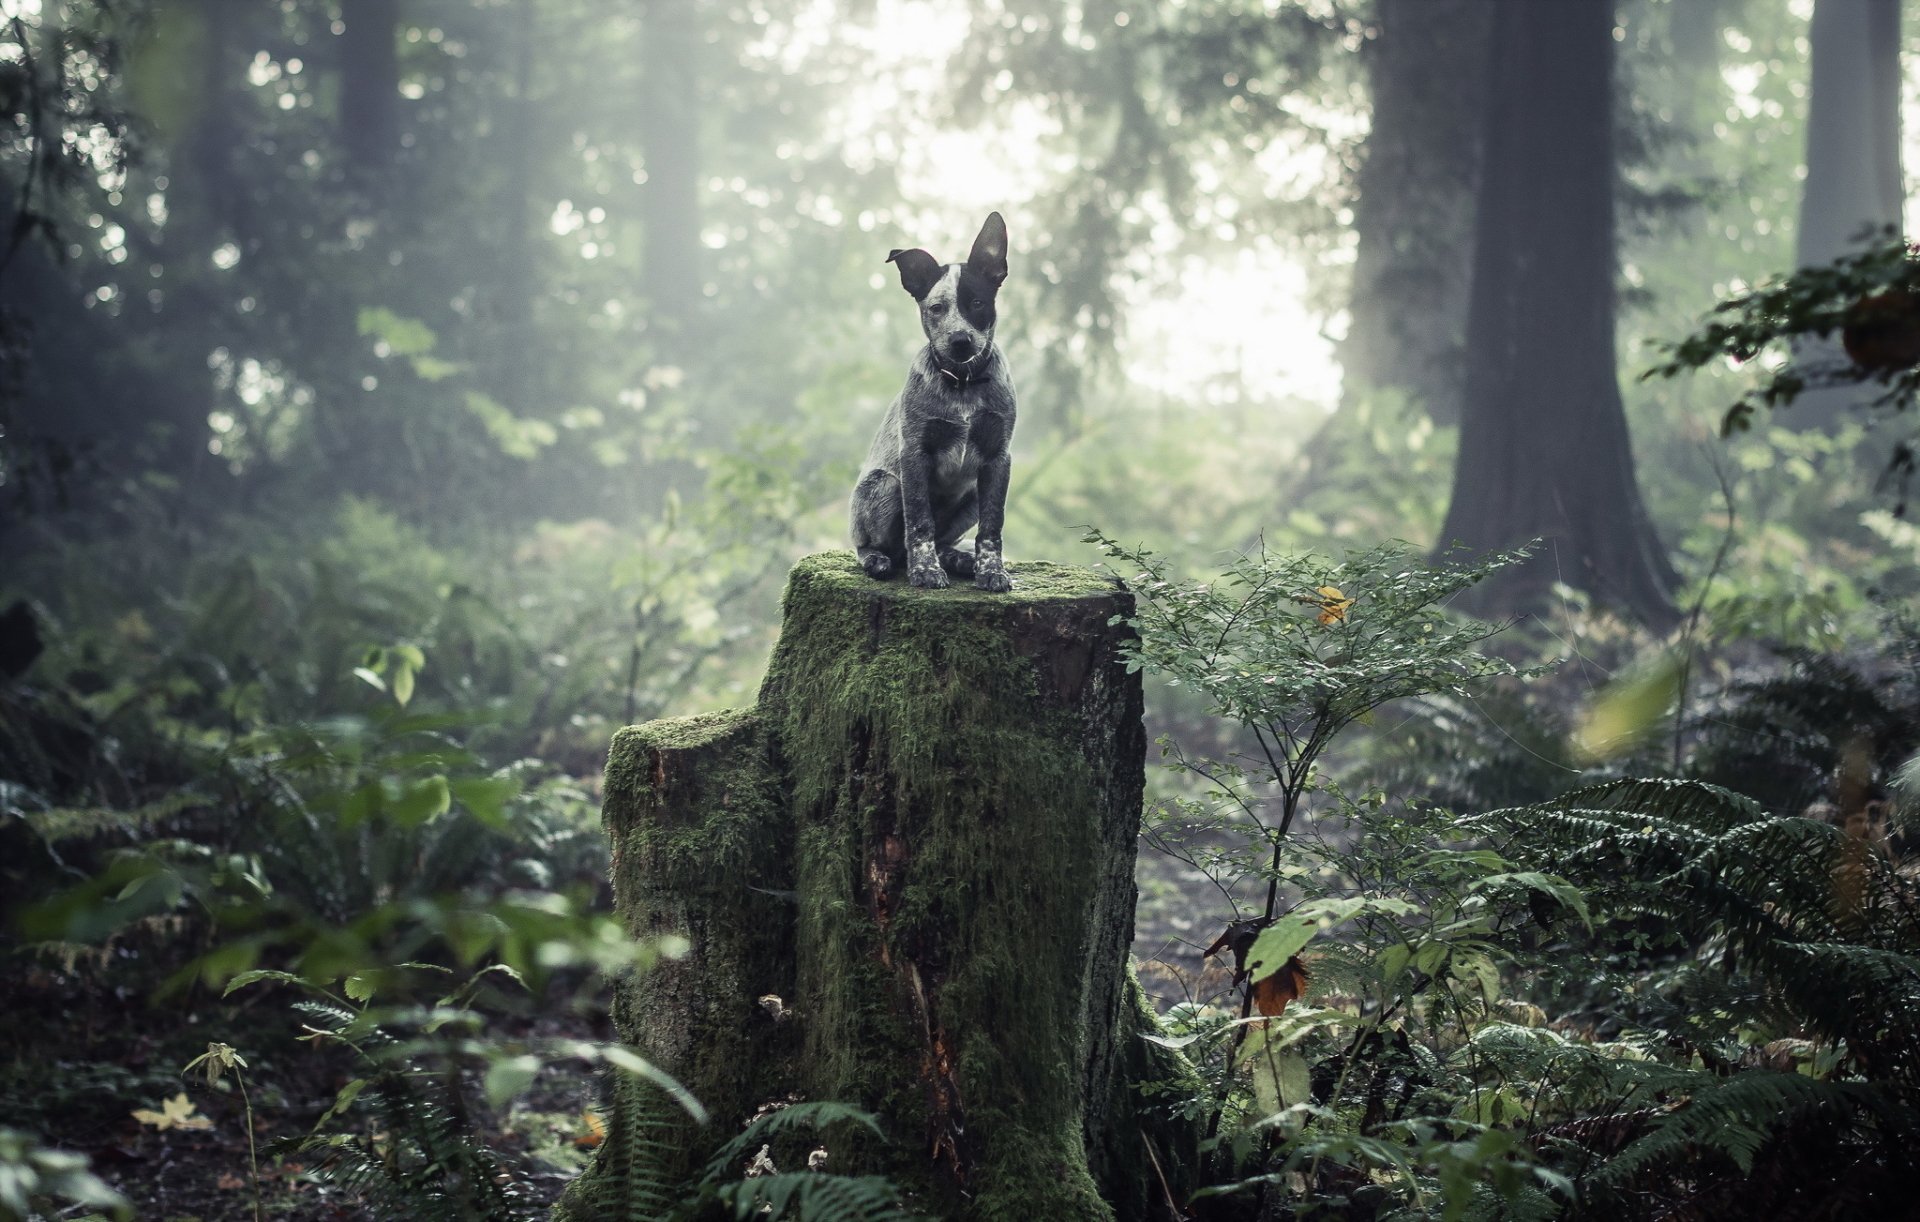 Cute Grey and Black Australian cattle dog Sitting on a Old Mossy Tree Stump Surrounded by Greenery by ADAM RAGAN